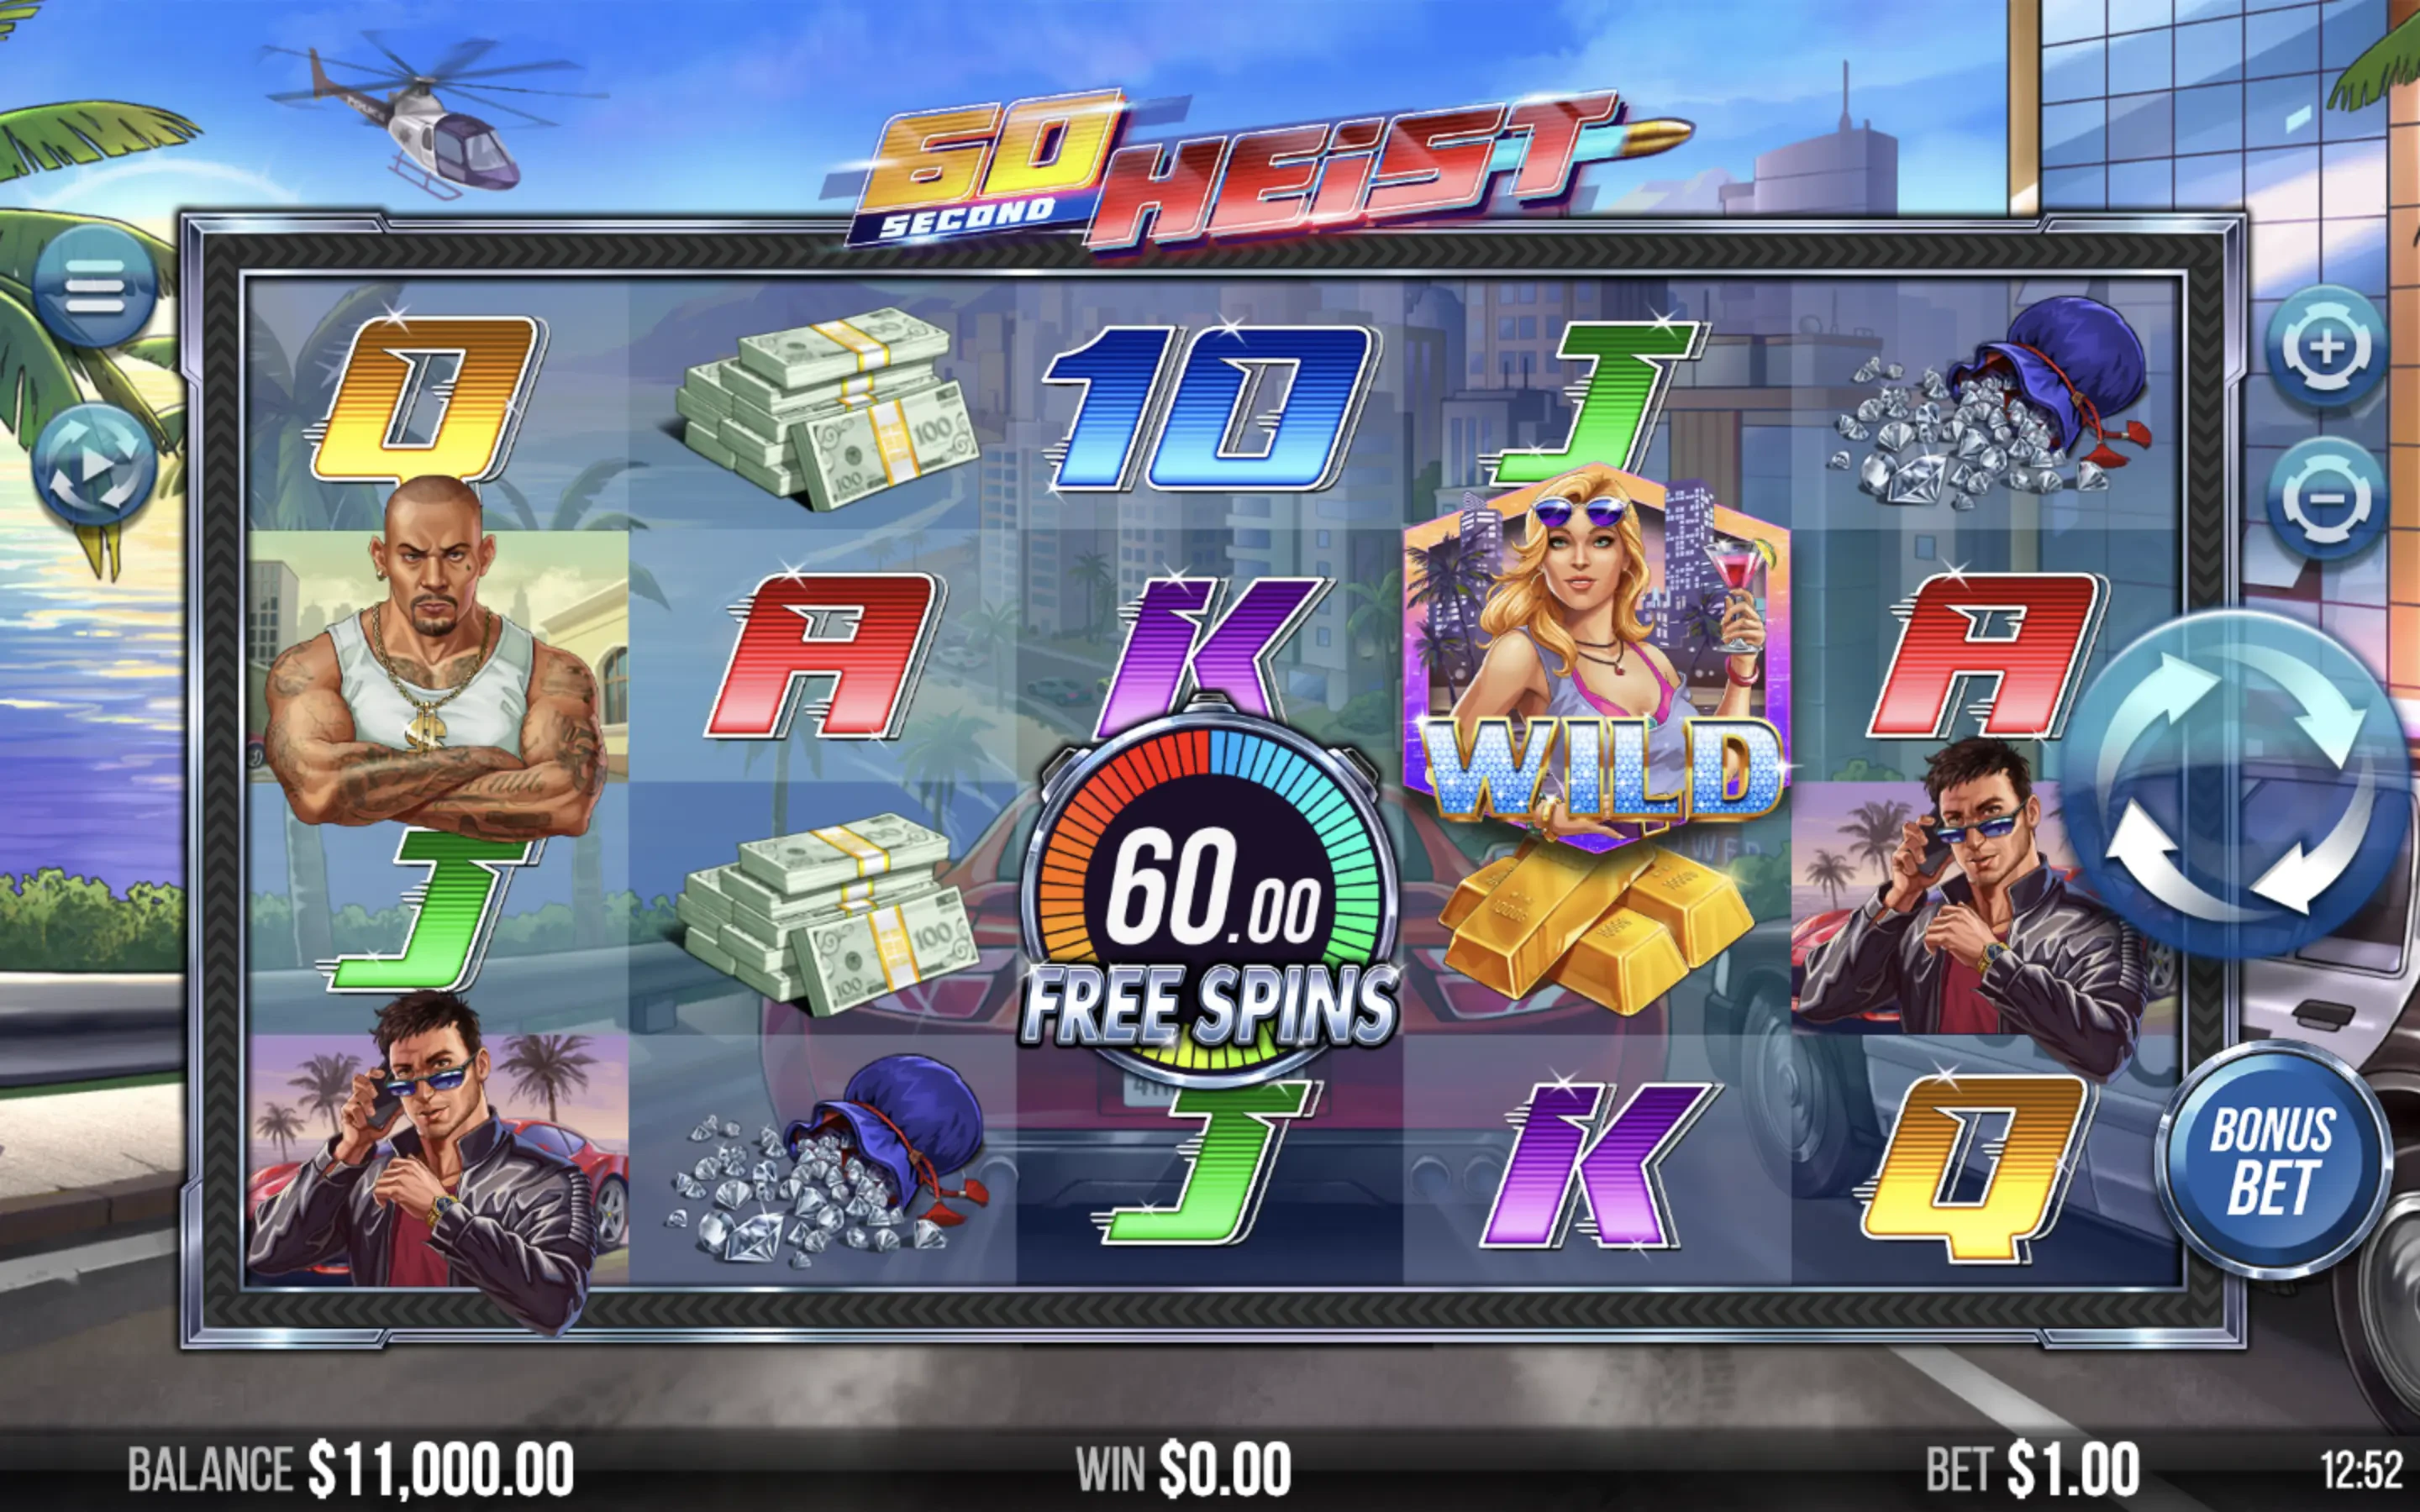 The 60 Seconds Heist slot machine by Yggdrasil Gaming